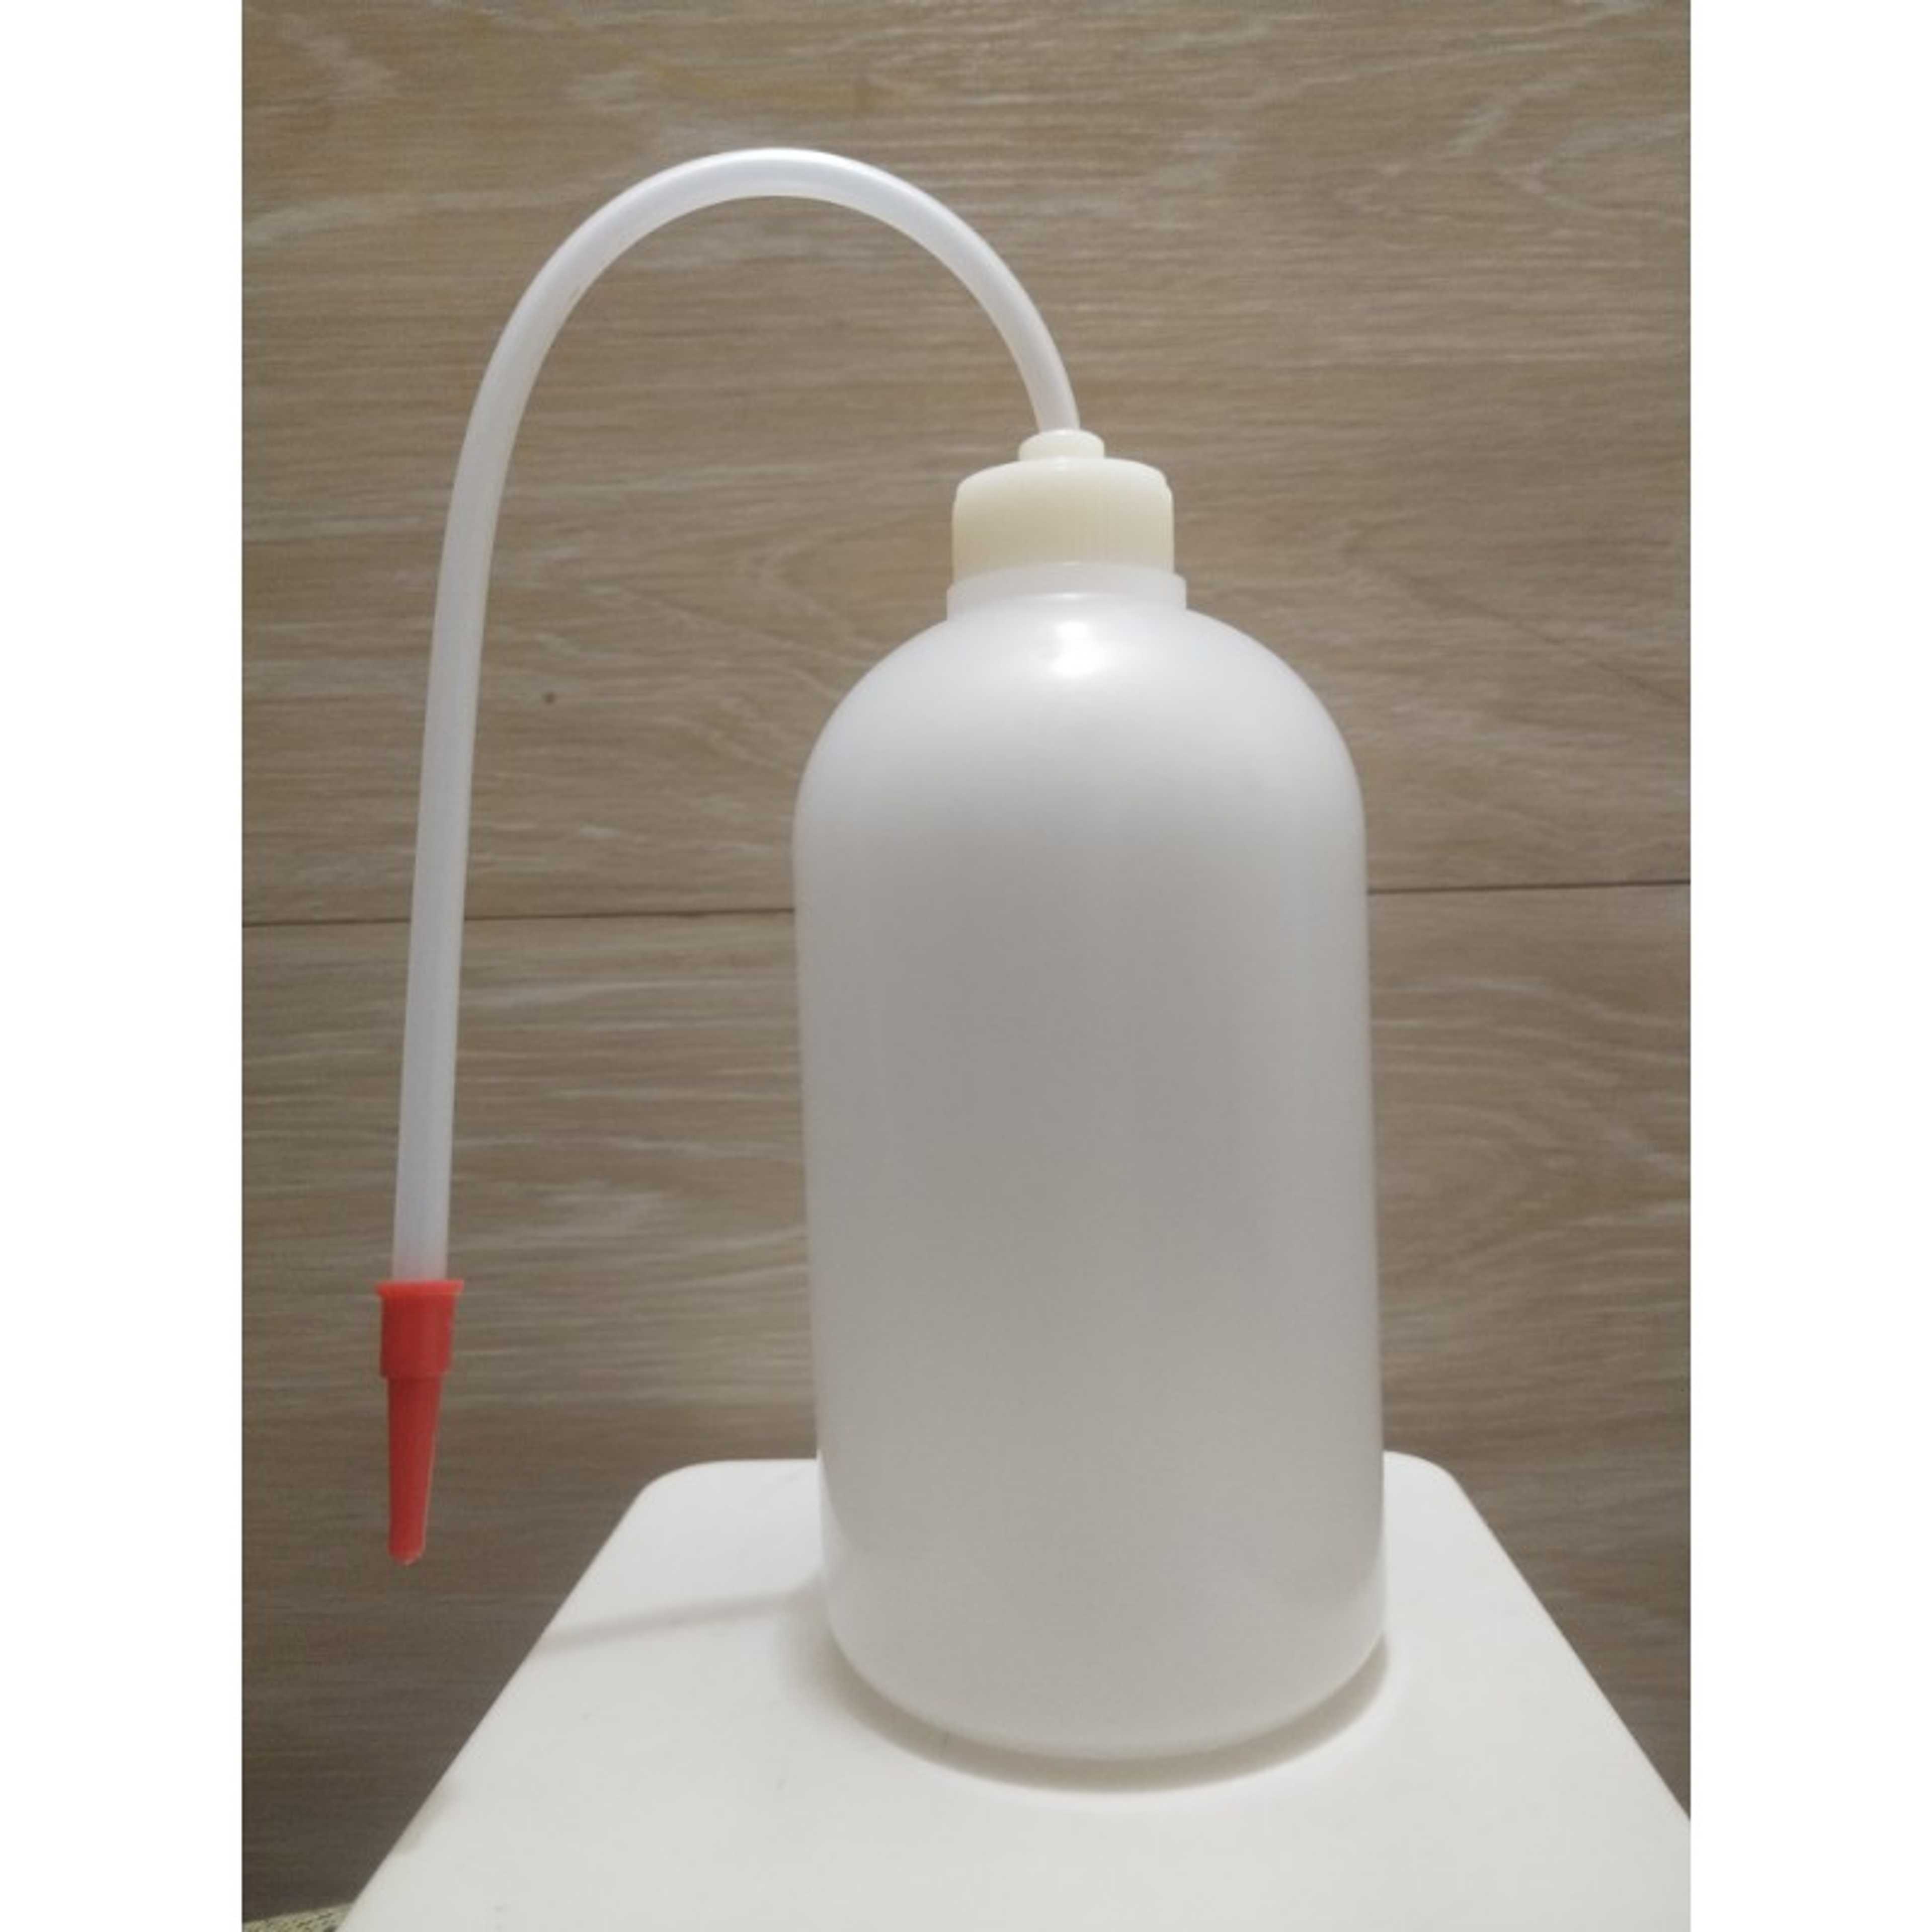 WASH BOTTLE, SQUEEZE BOTTLE, Wash BOTTLE FOR LABORATORY CLEANING 500 ml Wash bottle, Safety Wash Bottle, Squeeze Bottle, Narrow Mouth, Plastic, and Economy Plastic Squeeze Bottle for Medical Lab or Laboratory use